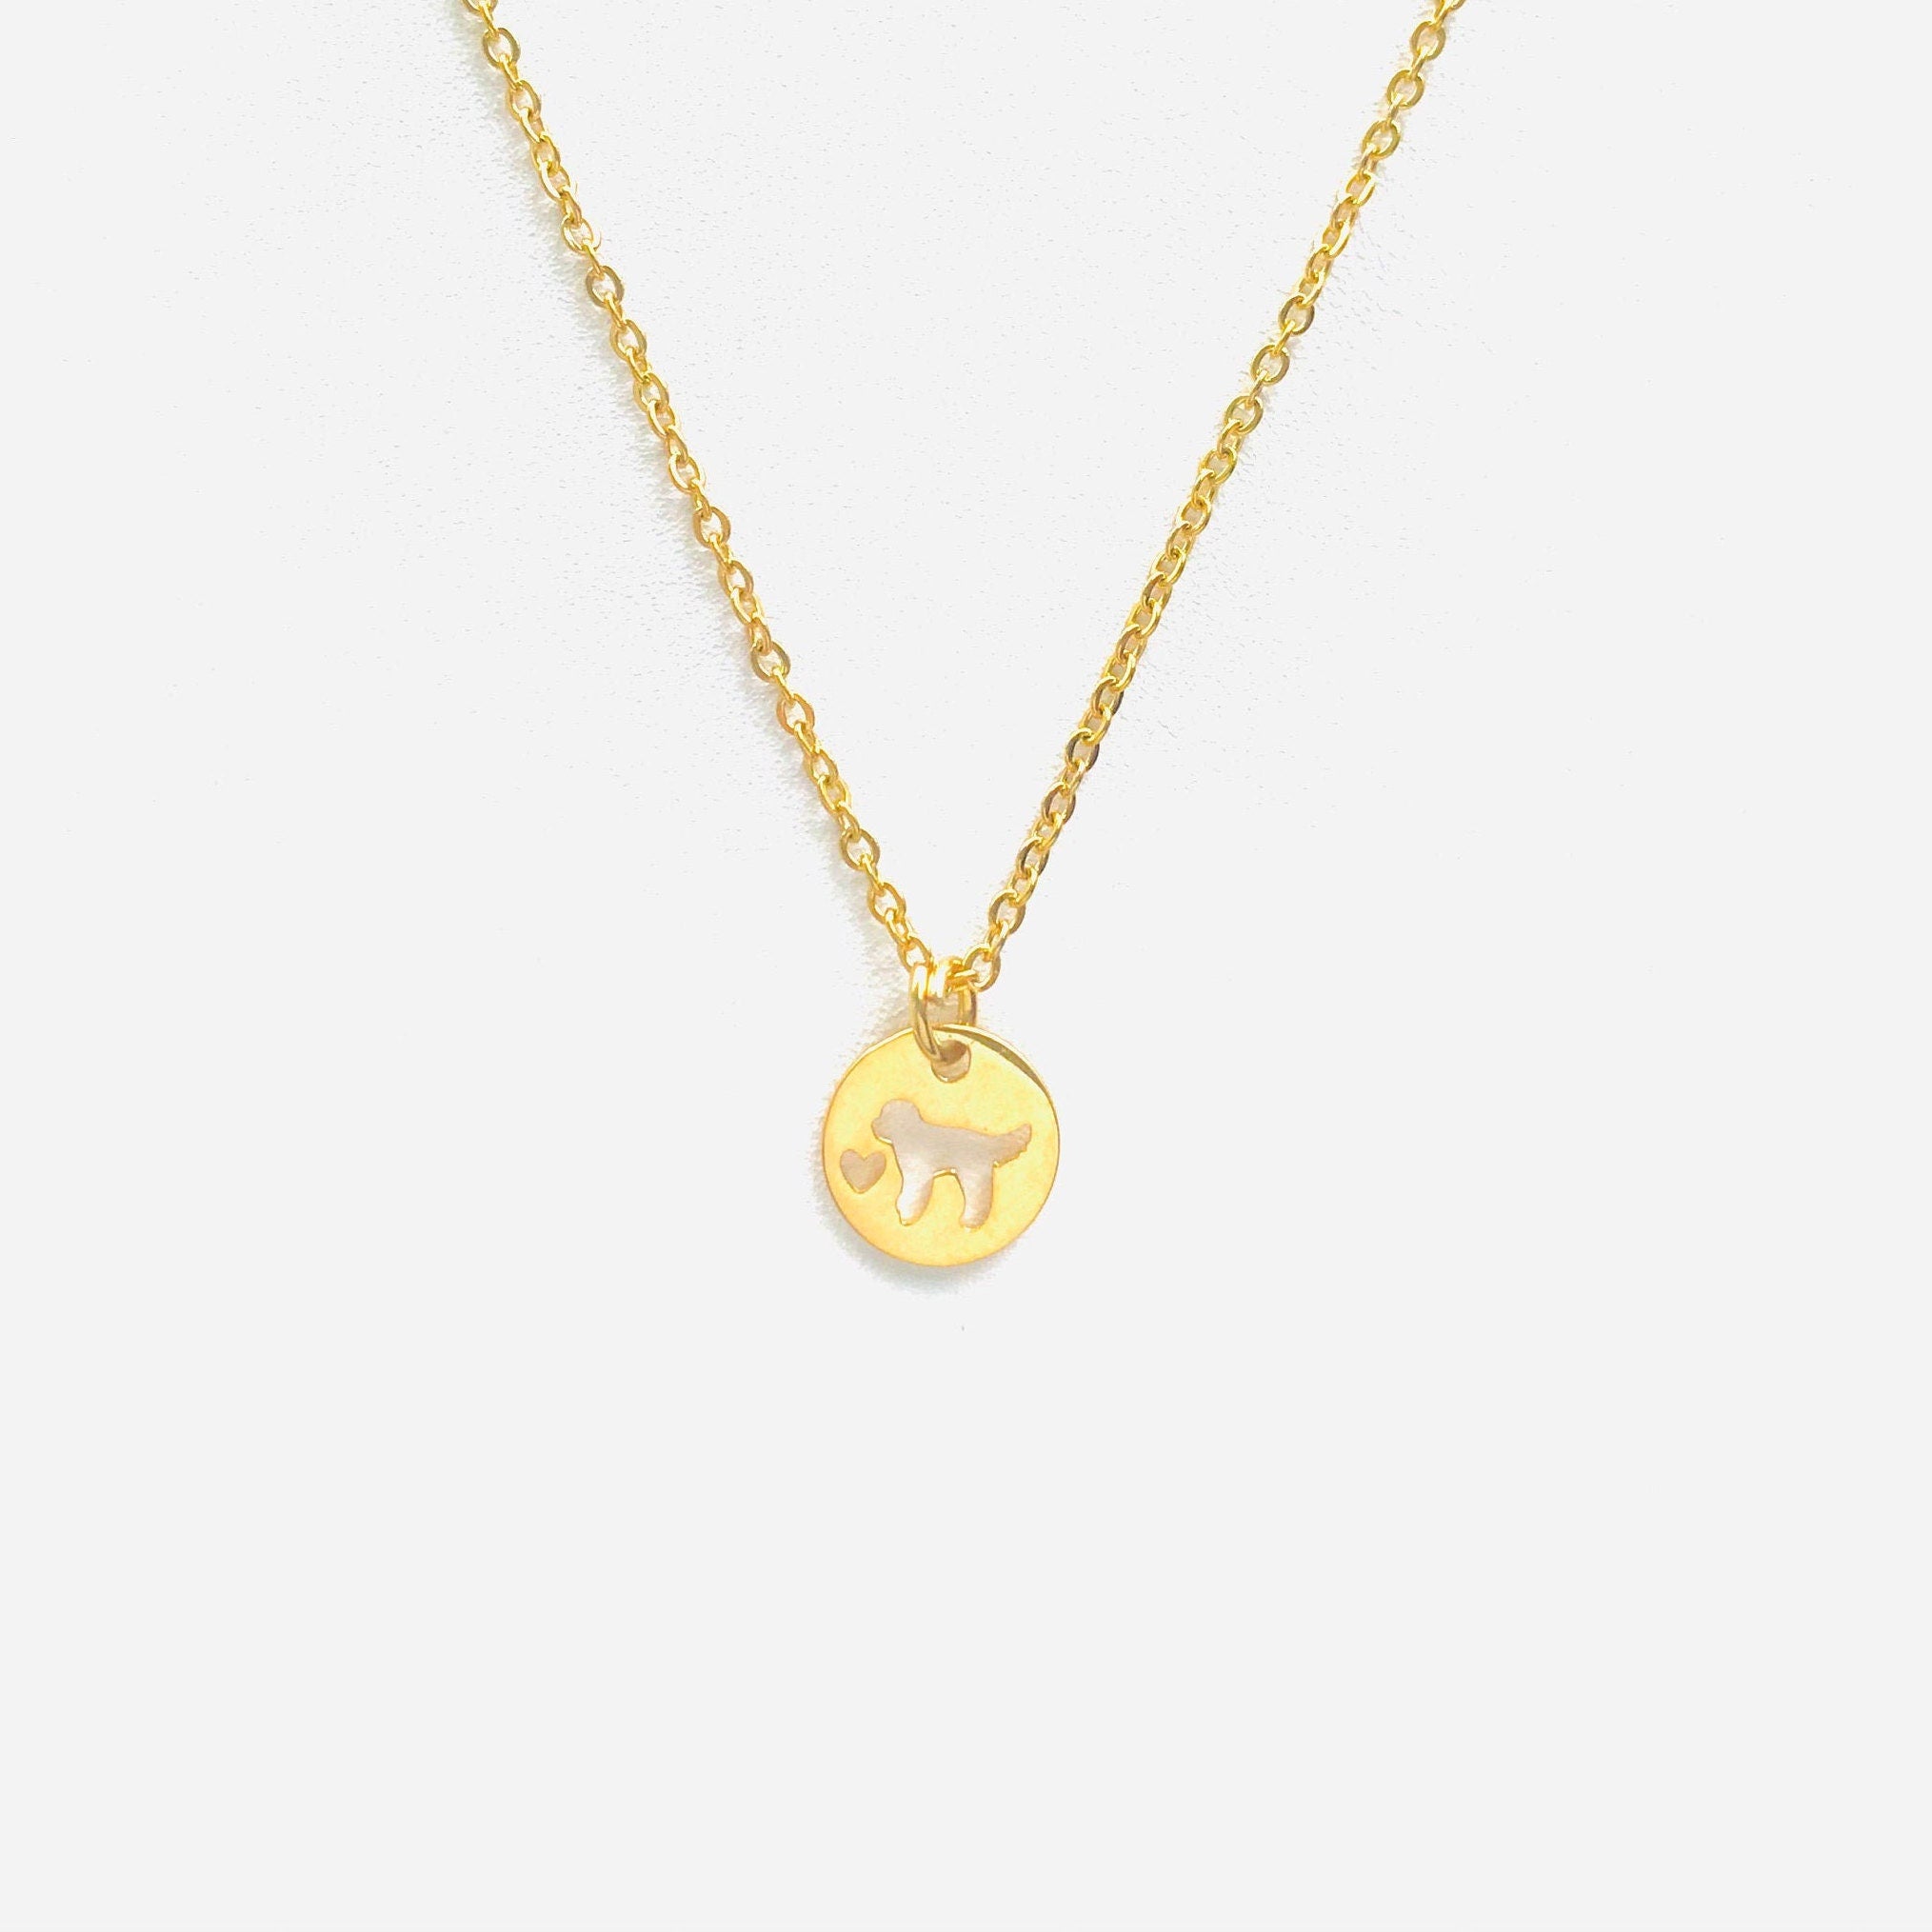 Goldendoodle dainty Necklace